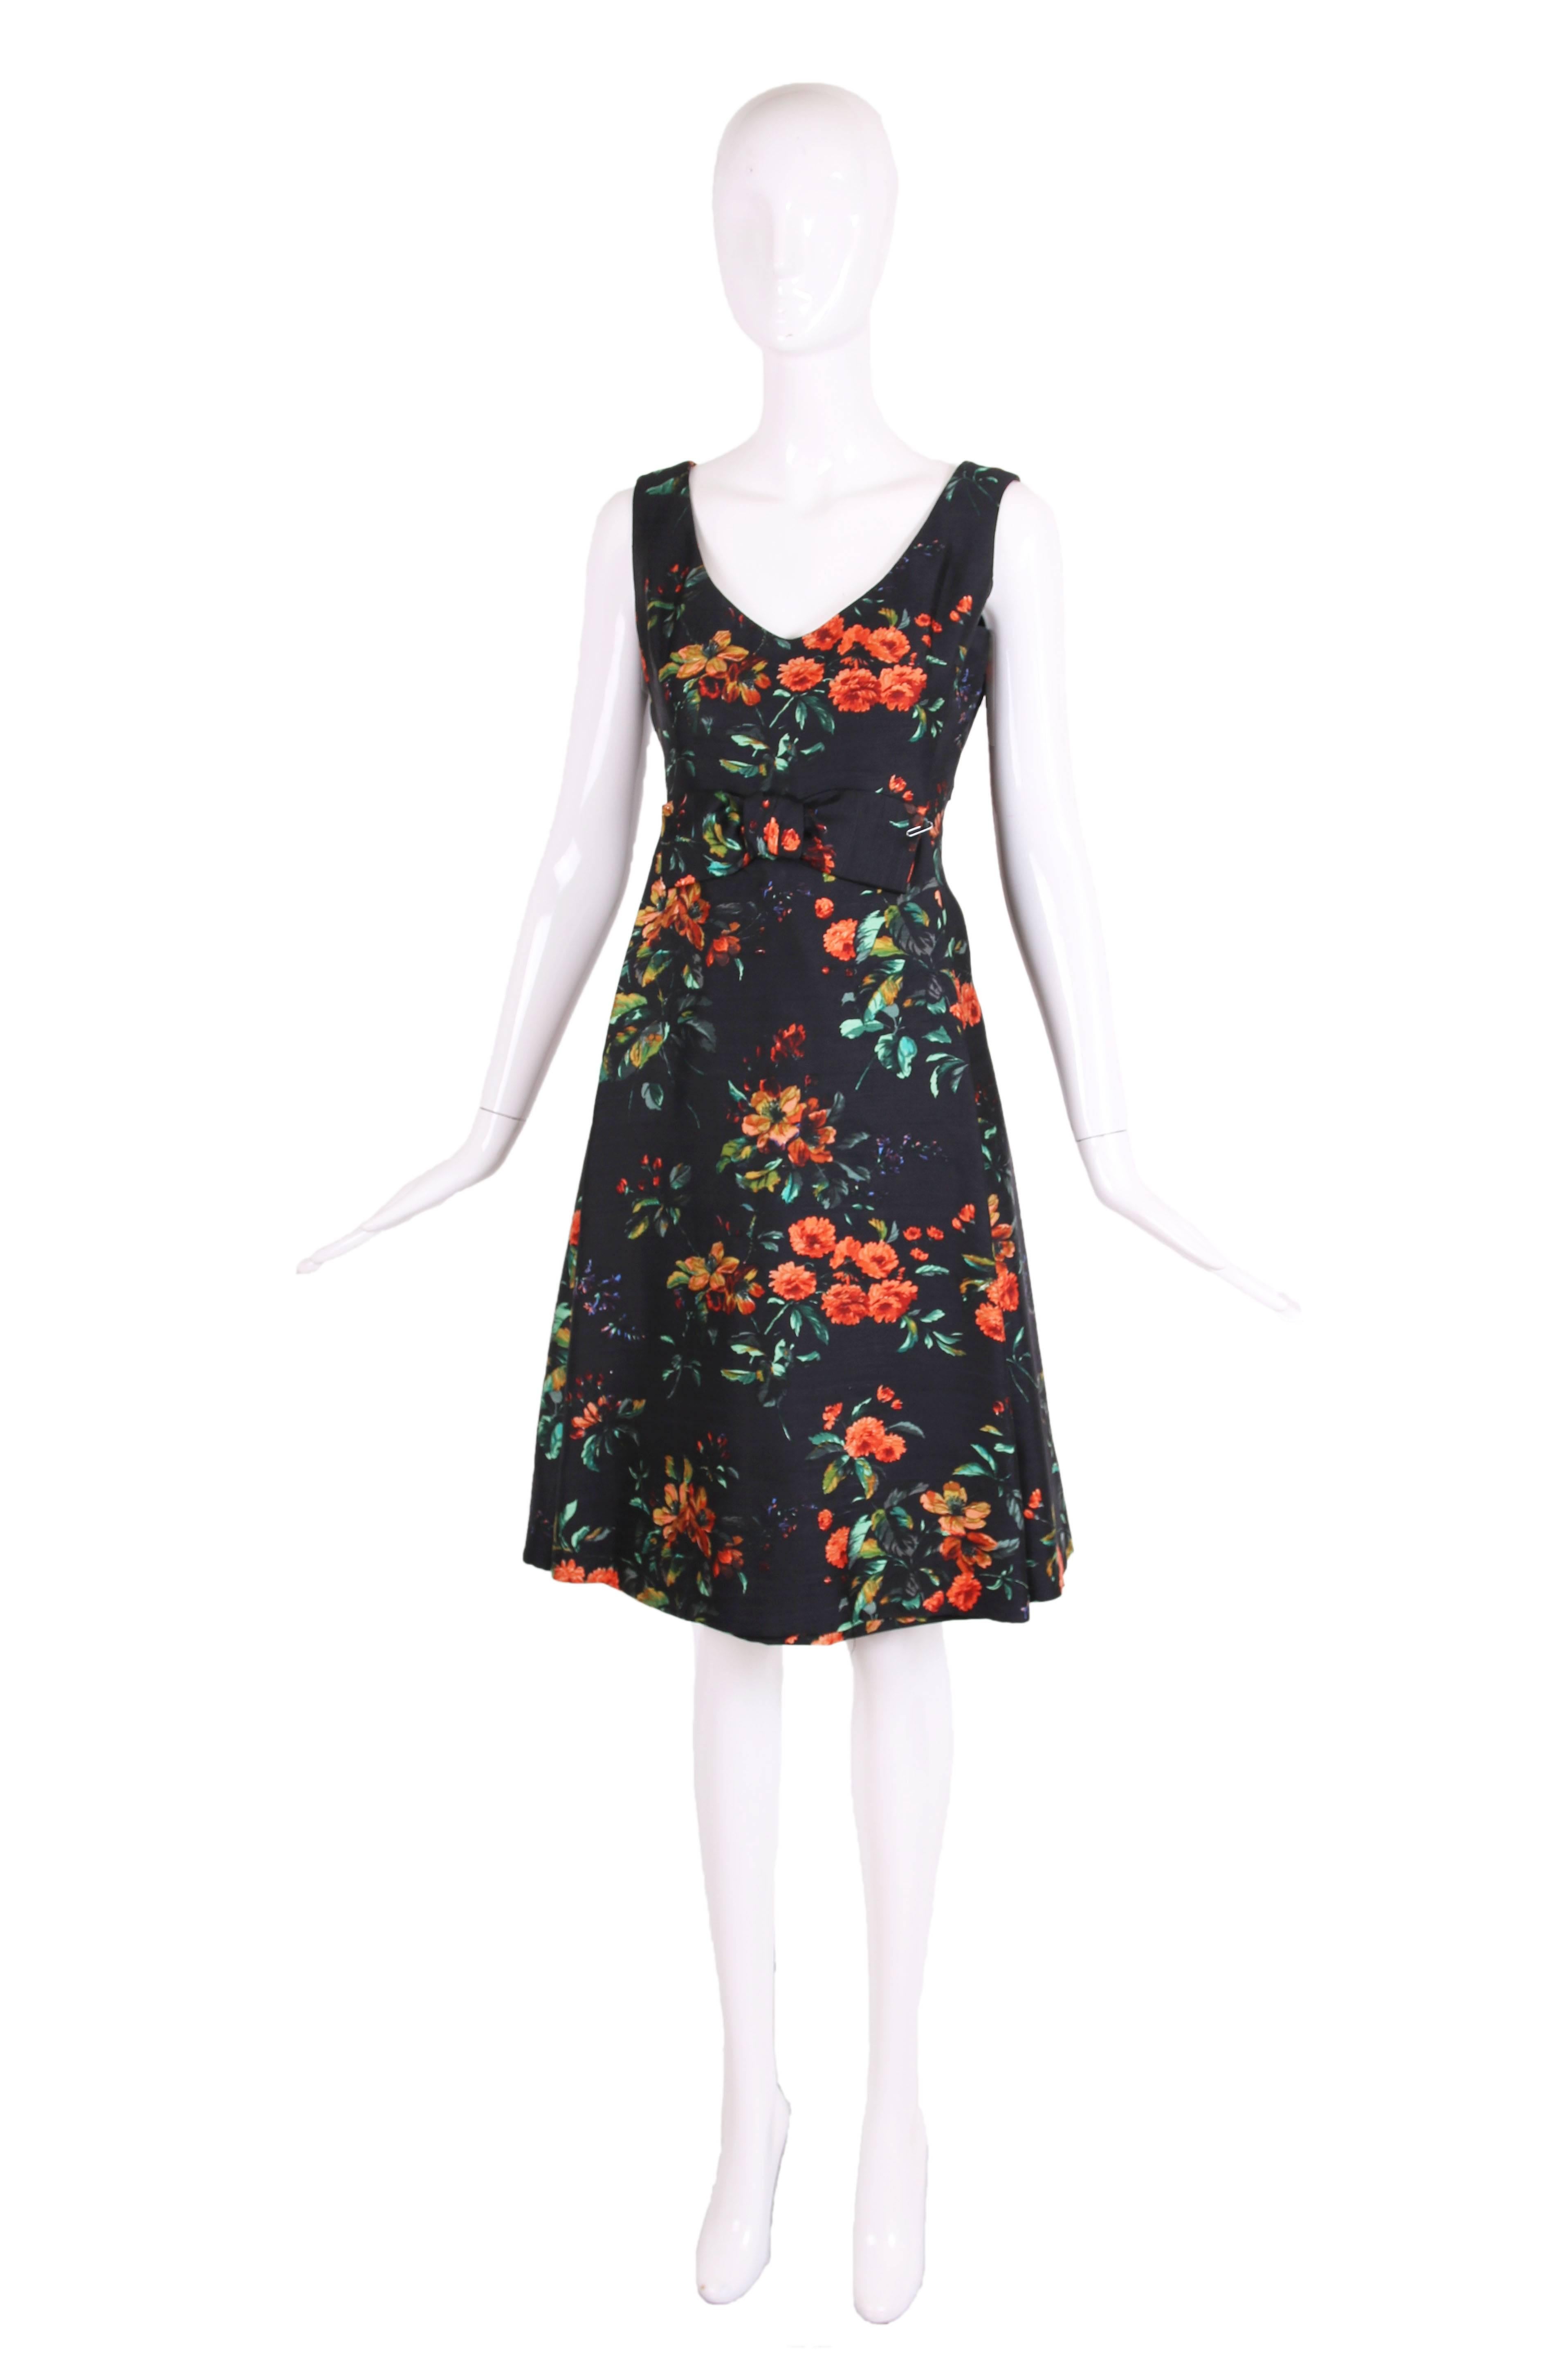 1960's Christian Dior navy blue silk shantung v-neck sleeveless dress in vibrant orange and green floral pattern. The dress features a tubular front panel, cropped back panel overlay, and frontal bow at the waist. In excellent condition. No size